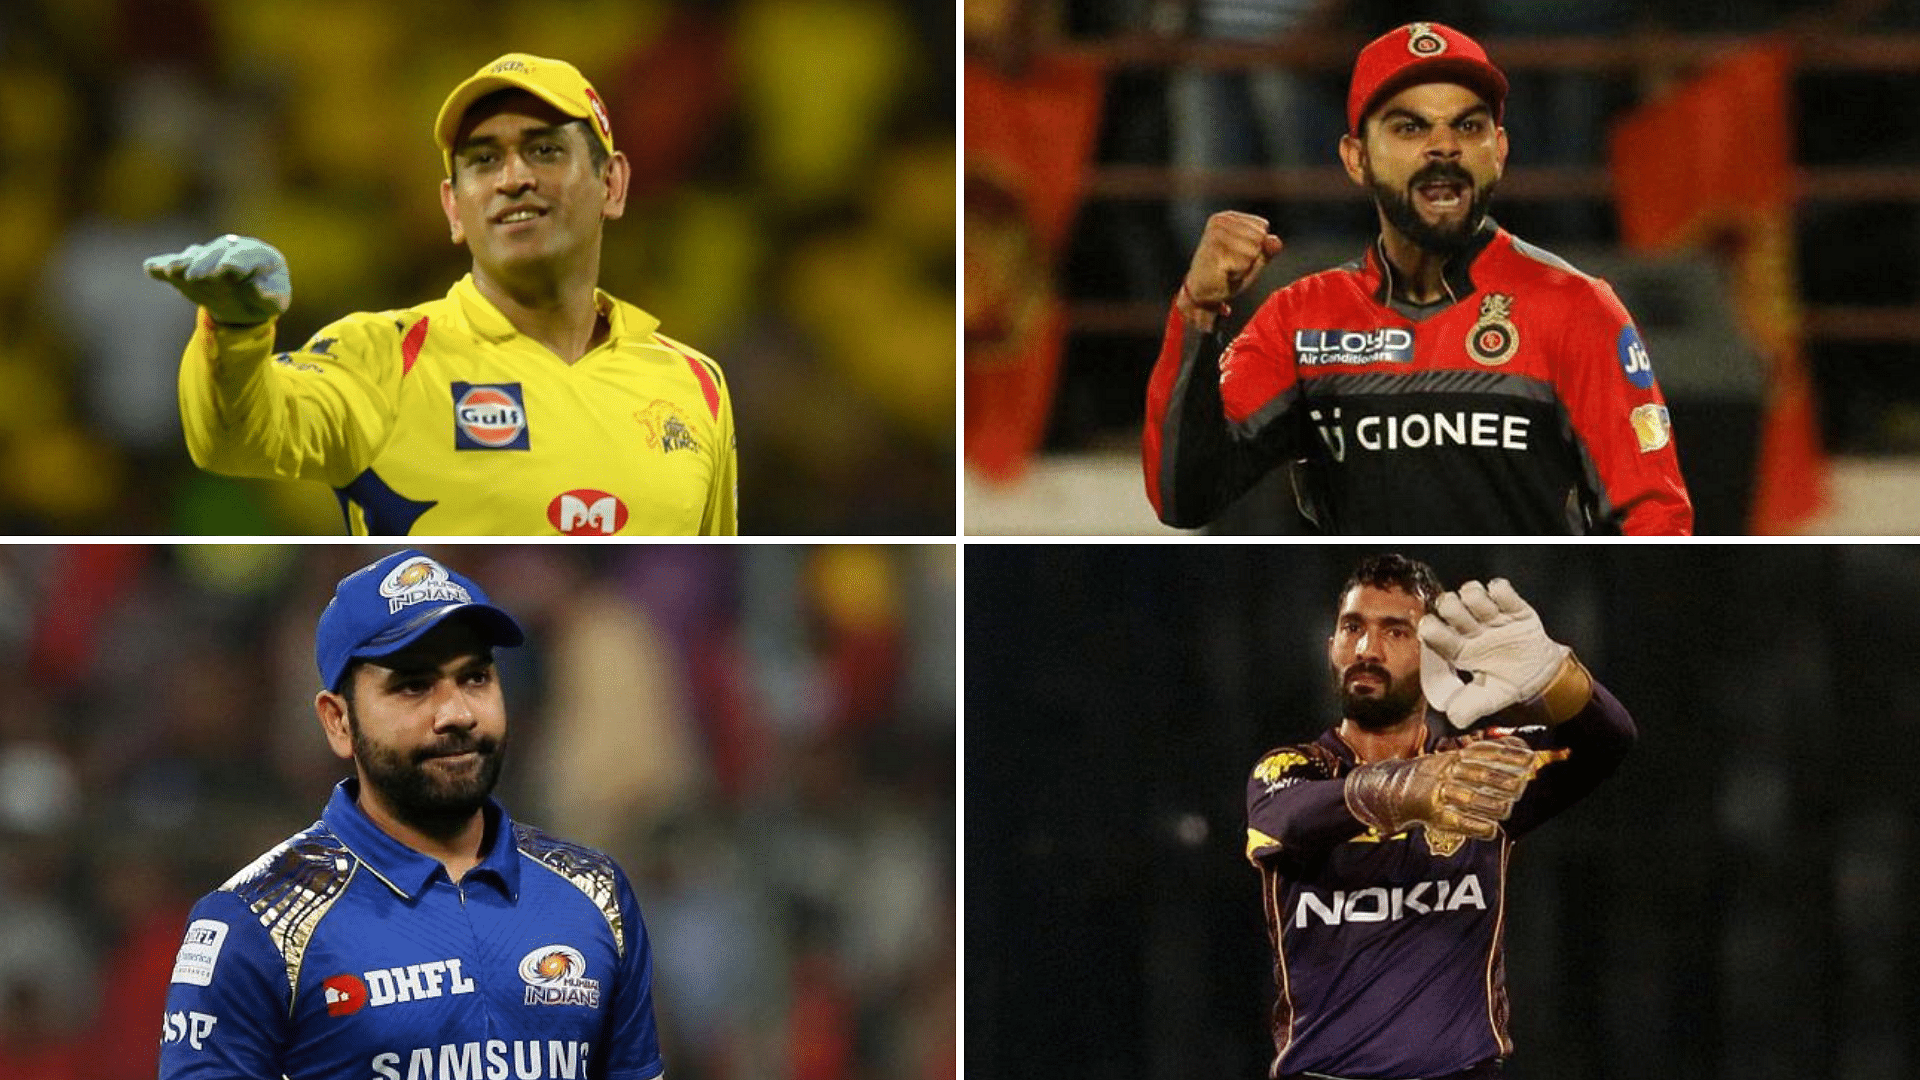 The dream of Indian Premier League (IPL) franchises to head to countries like the US and promote the game is set to be discussed.